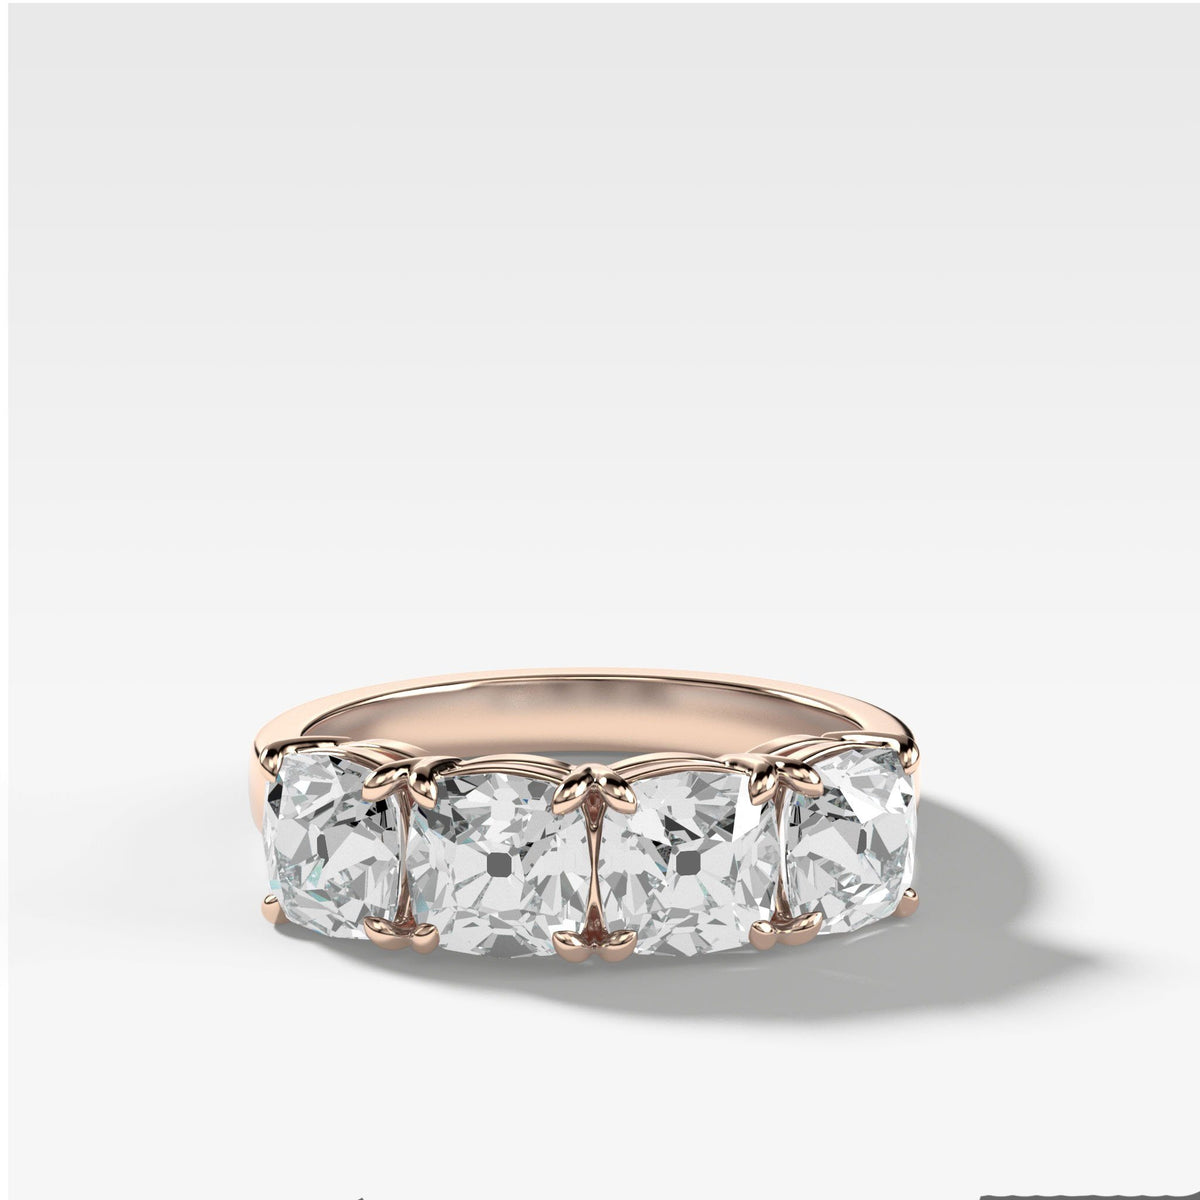 Four Stone Diamond Wedding Band With Old Mine Cuts by Good Stone in Rose Gold